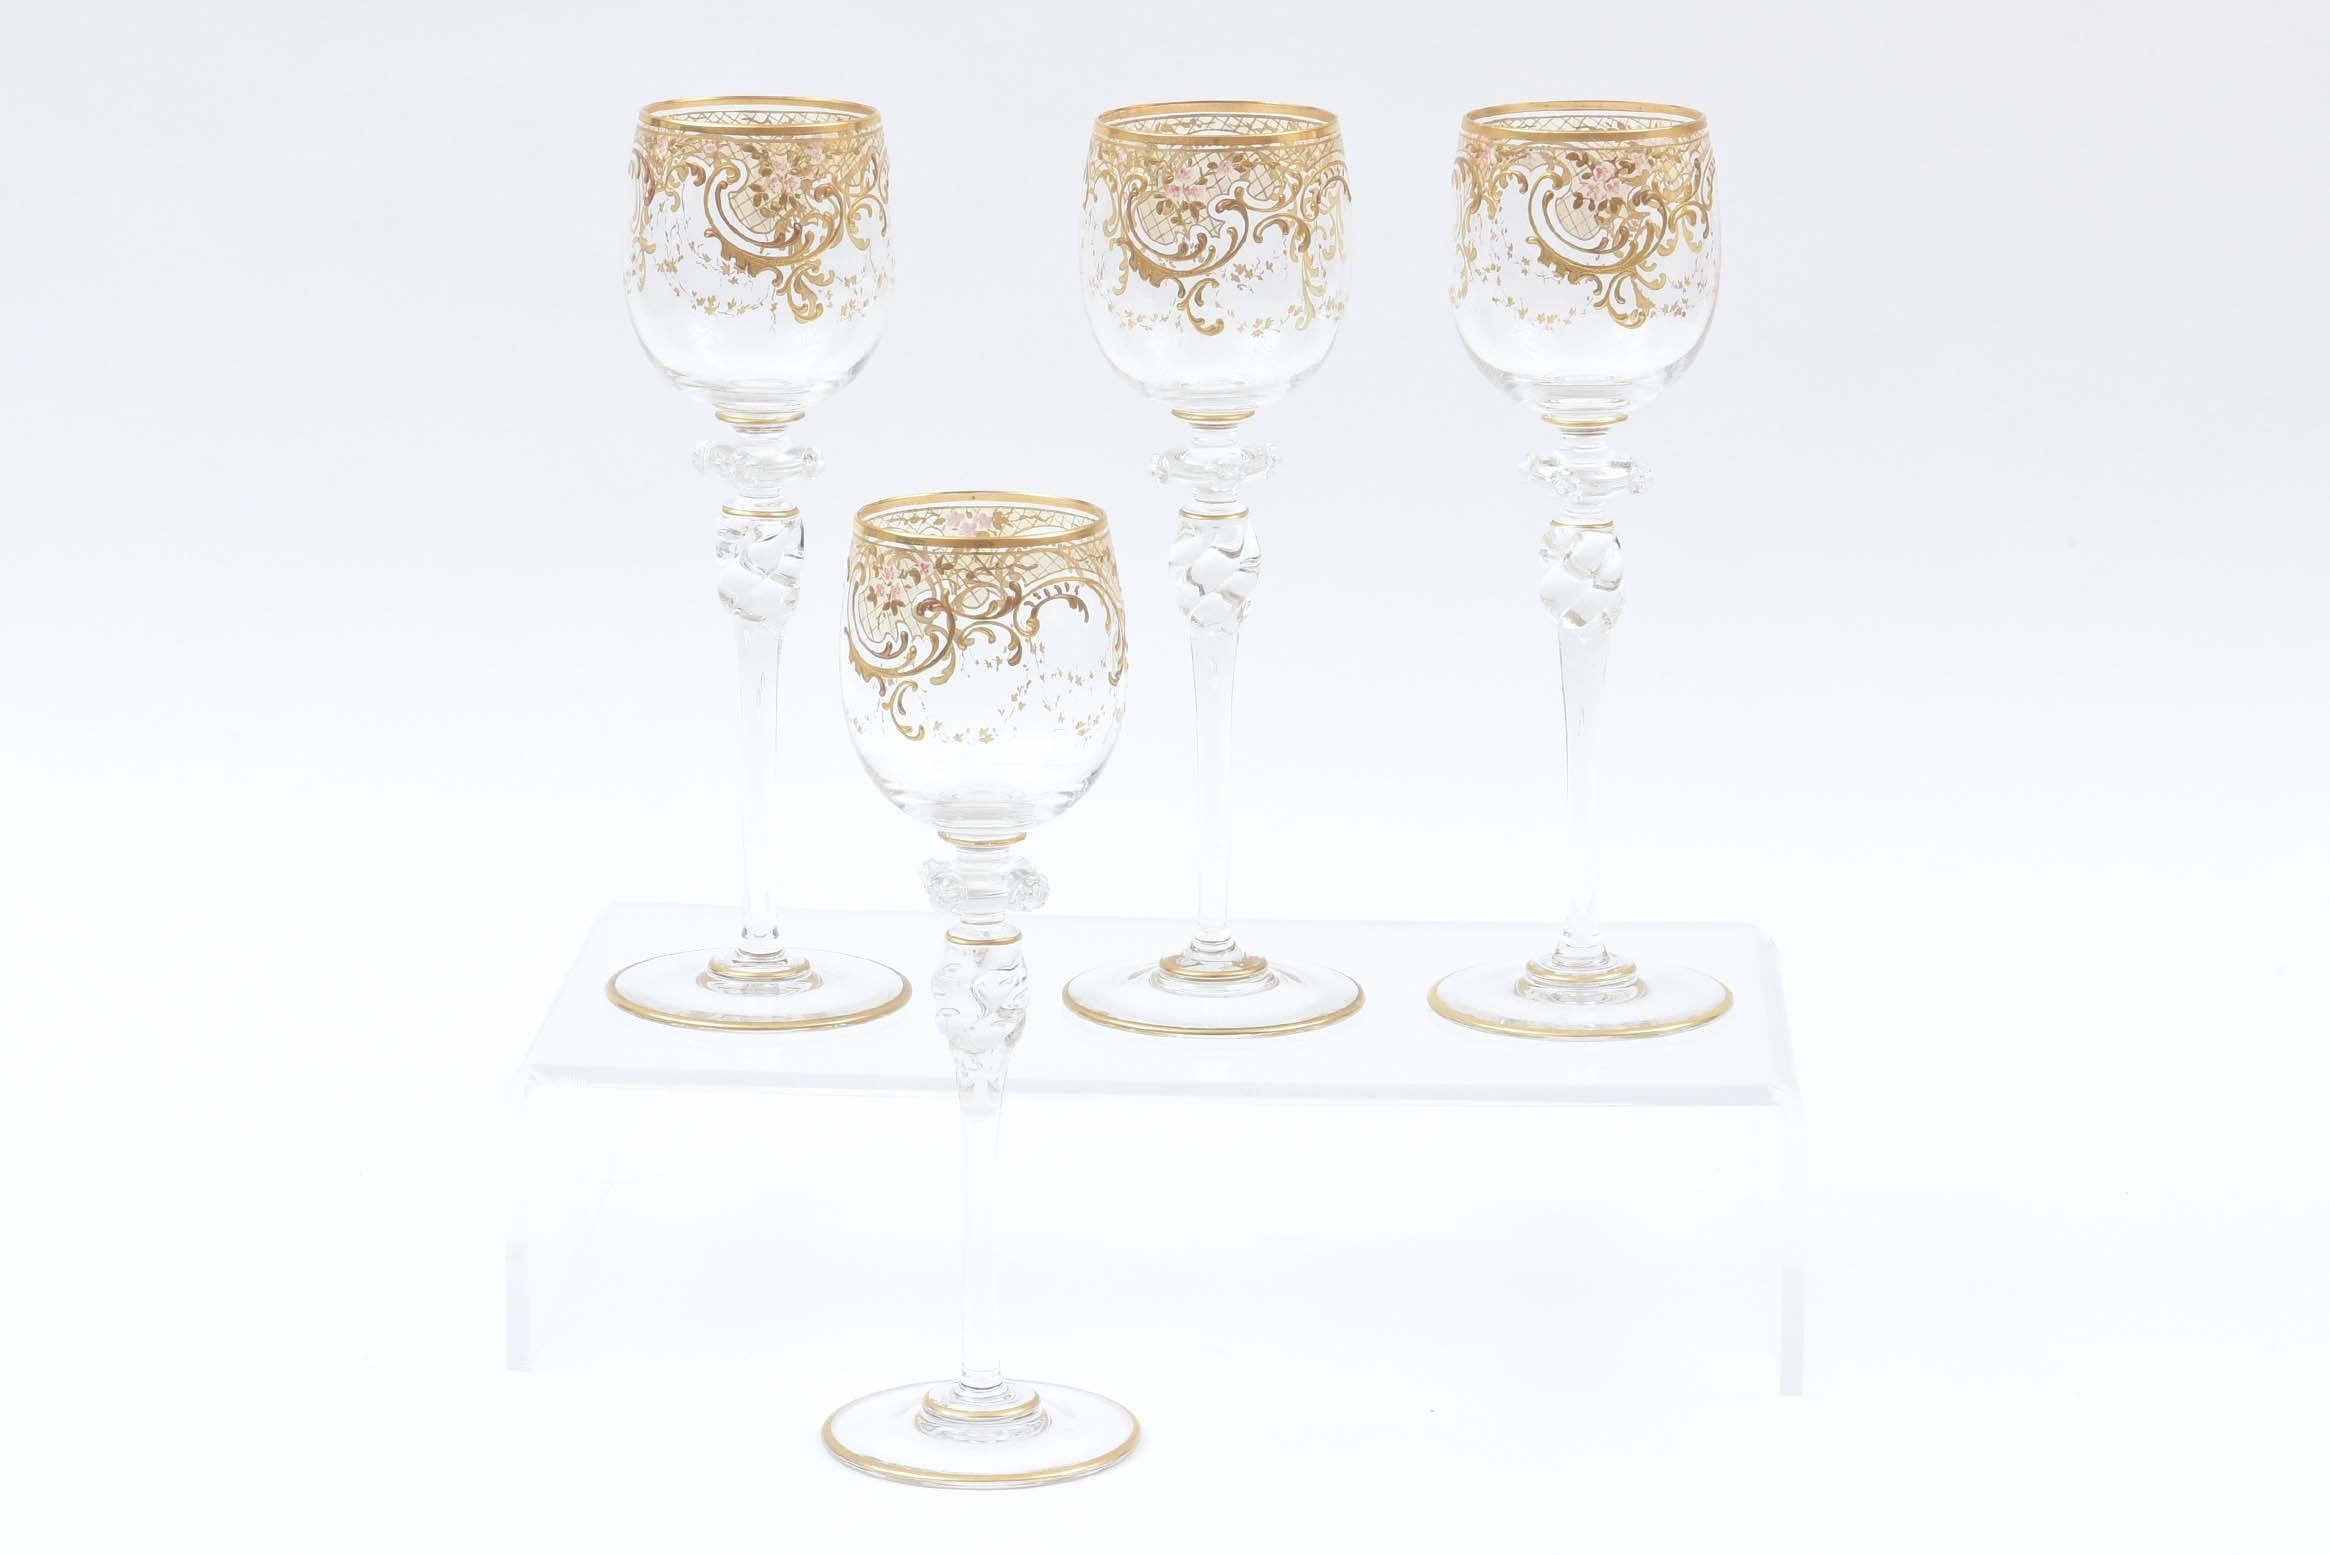 A pretty set of blown wine glasses with some great detail. Extra applied glass prunts, raised tooled gold and hand enameled flowers surround the bowl. A nice tall swirl stem and trimmed on the bottom with gold too.